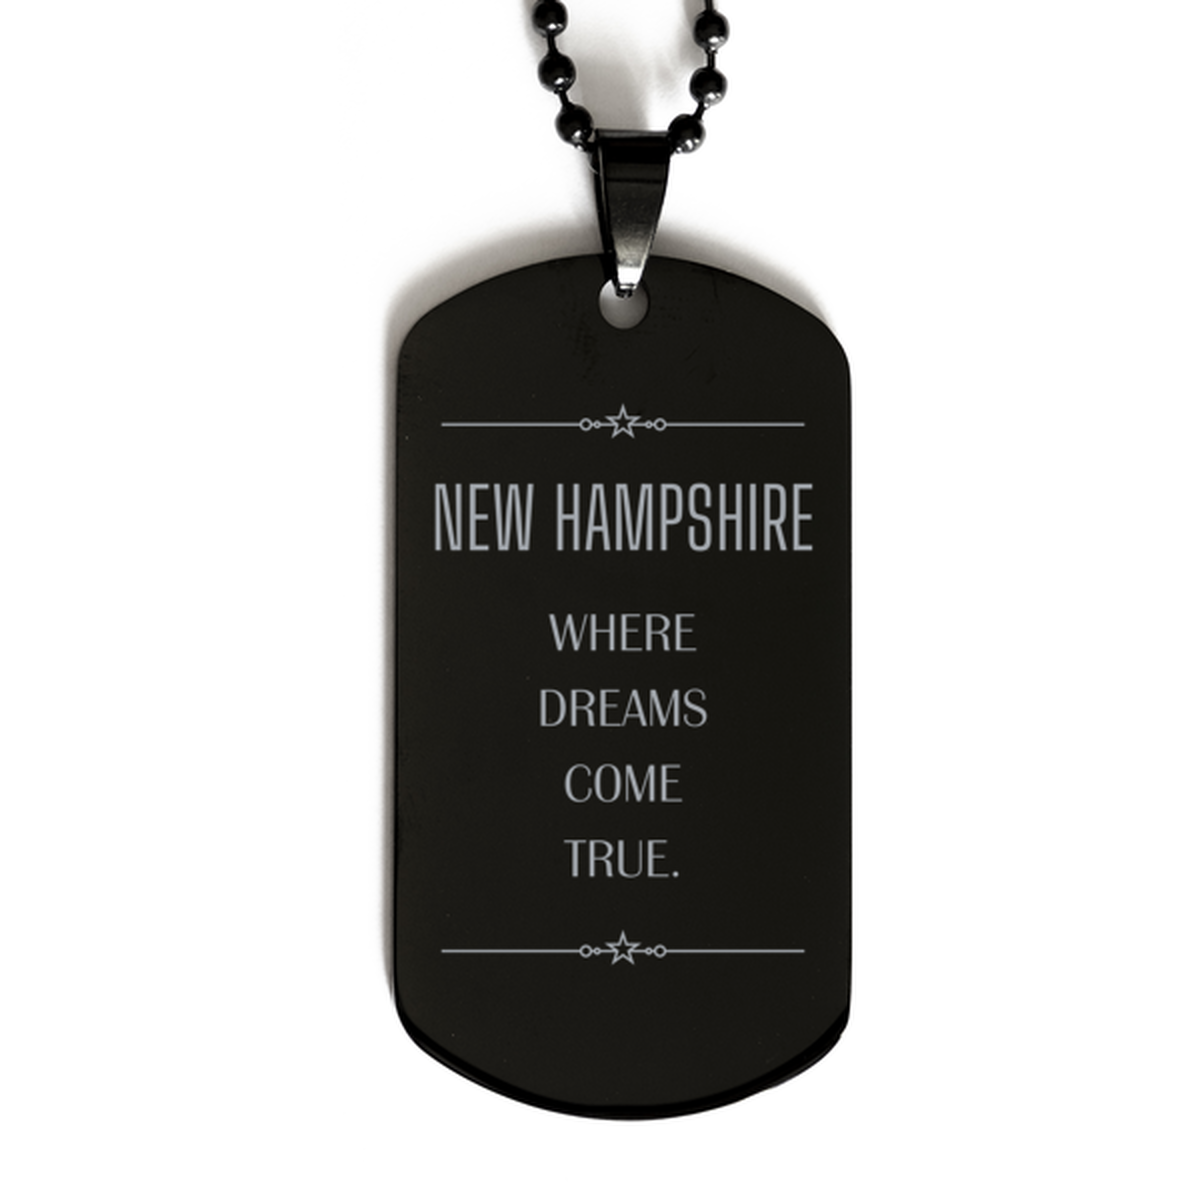 Love New Hampshire State Black Dog Tag, New Hampshire Where dreams come true, Birthday Inspirational Gifts For New Hampshire Men, Women, Friends